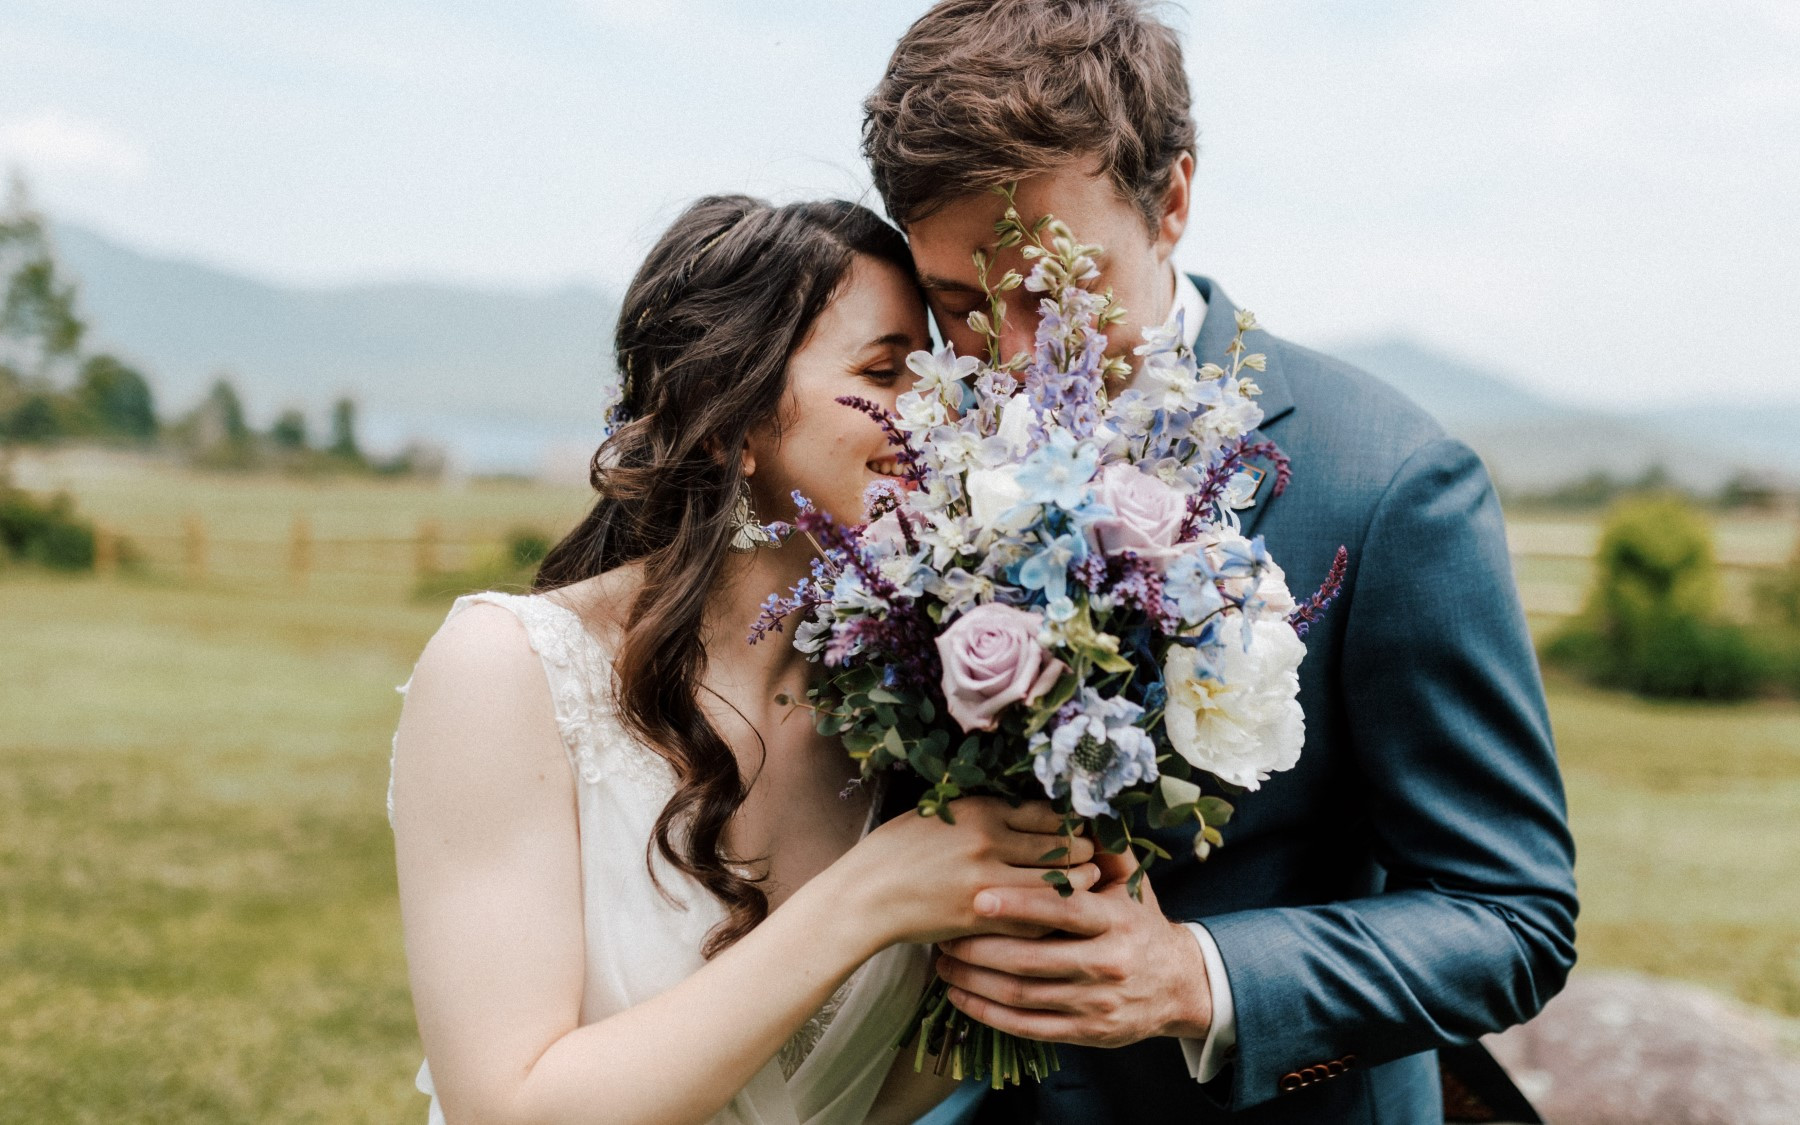 bride and groom hiding faces behind floral arrangement with blue and purple floweres.